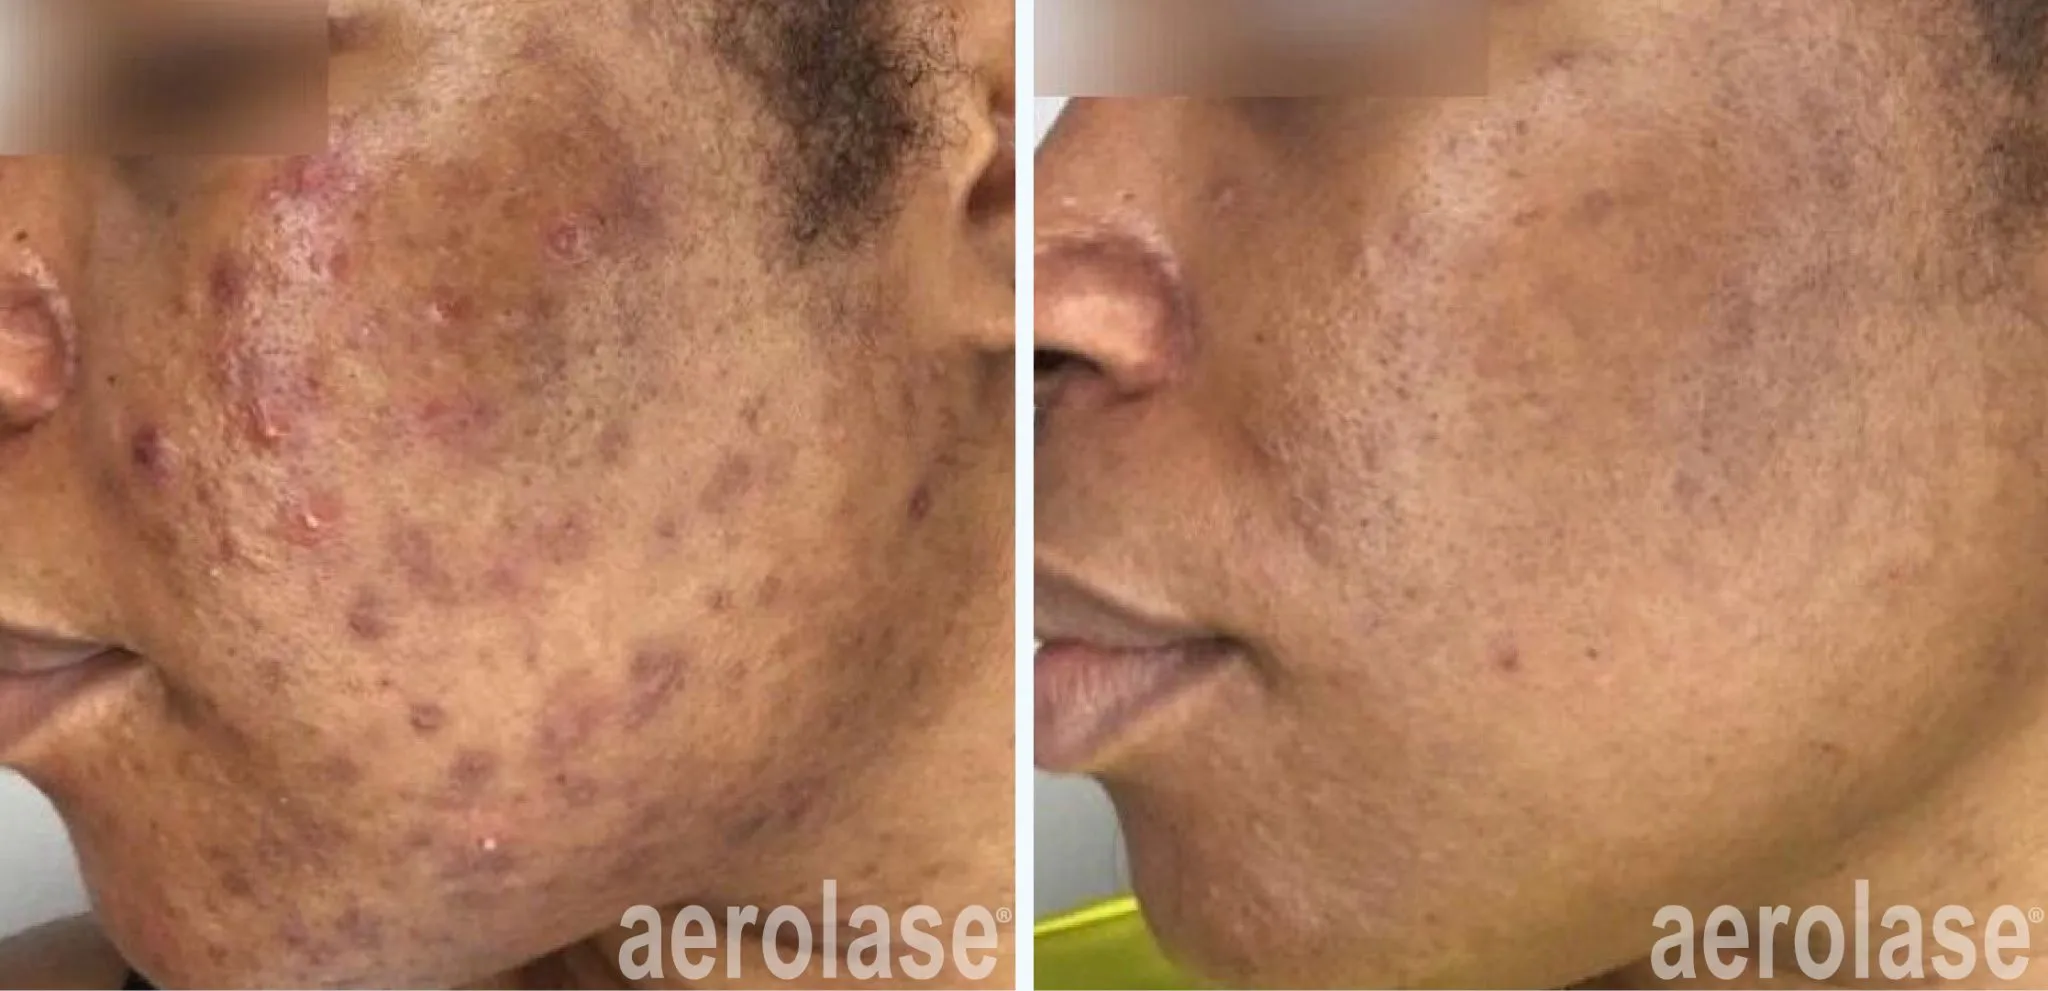 111acne-cheeks-sholema-skinofcolor-before-and-after-1-2048x991